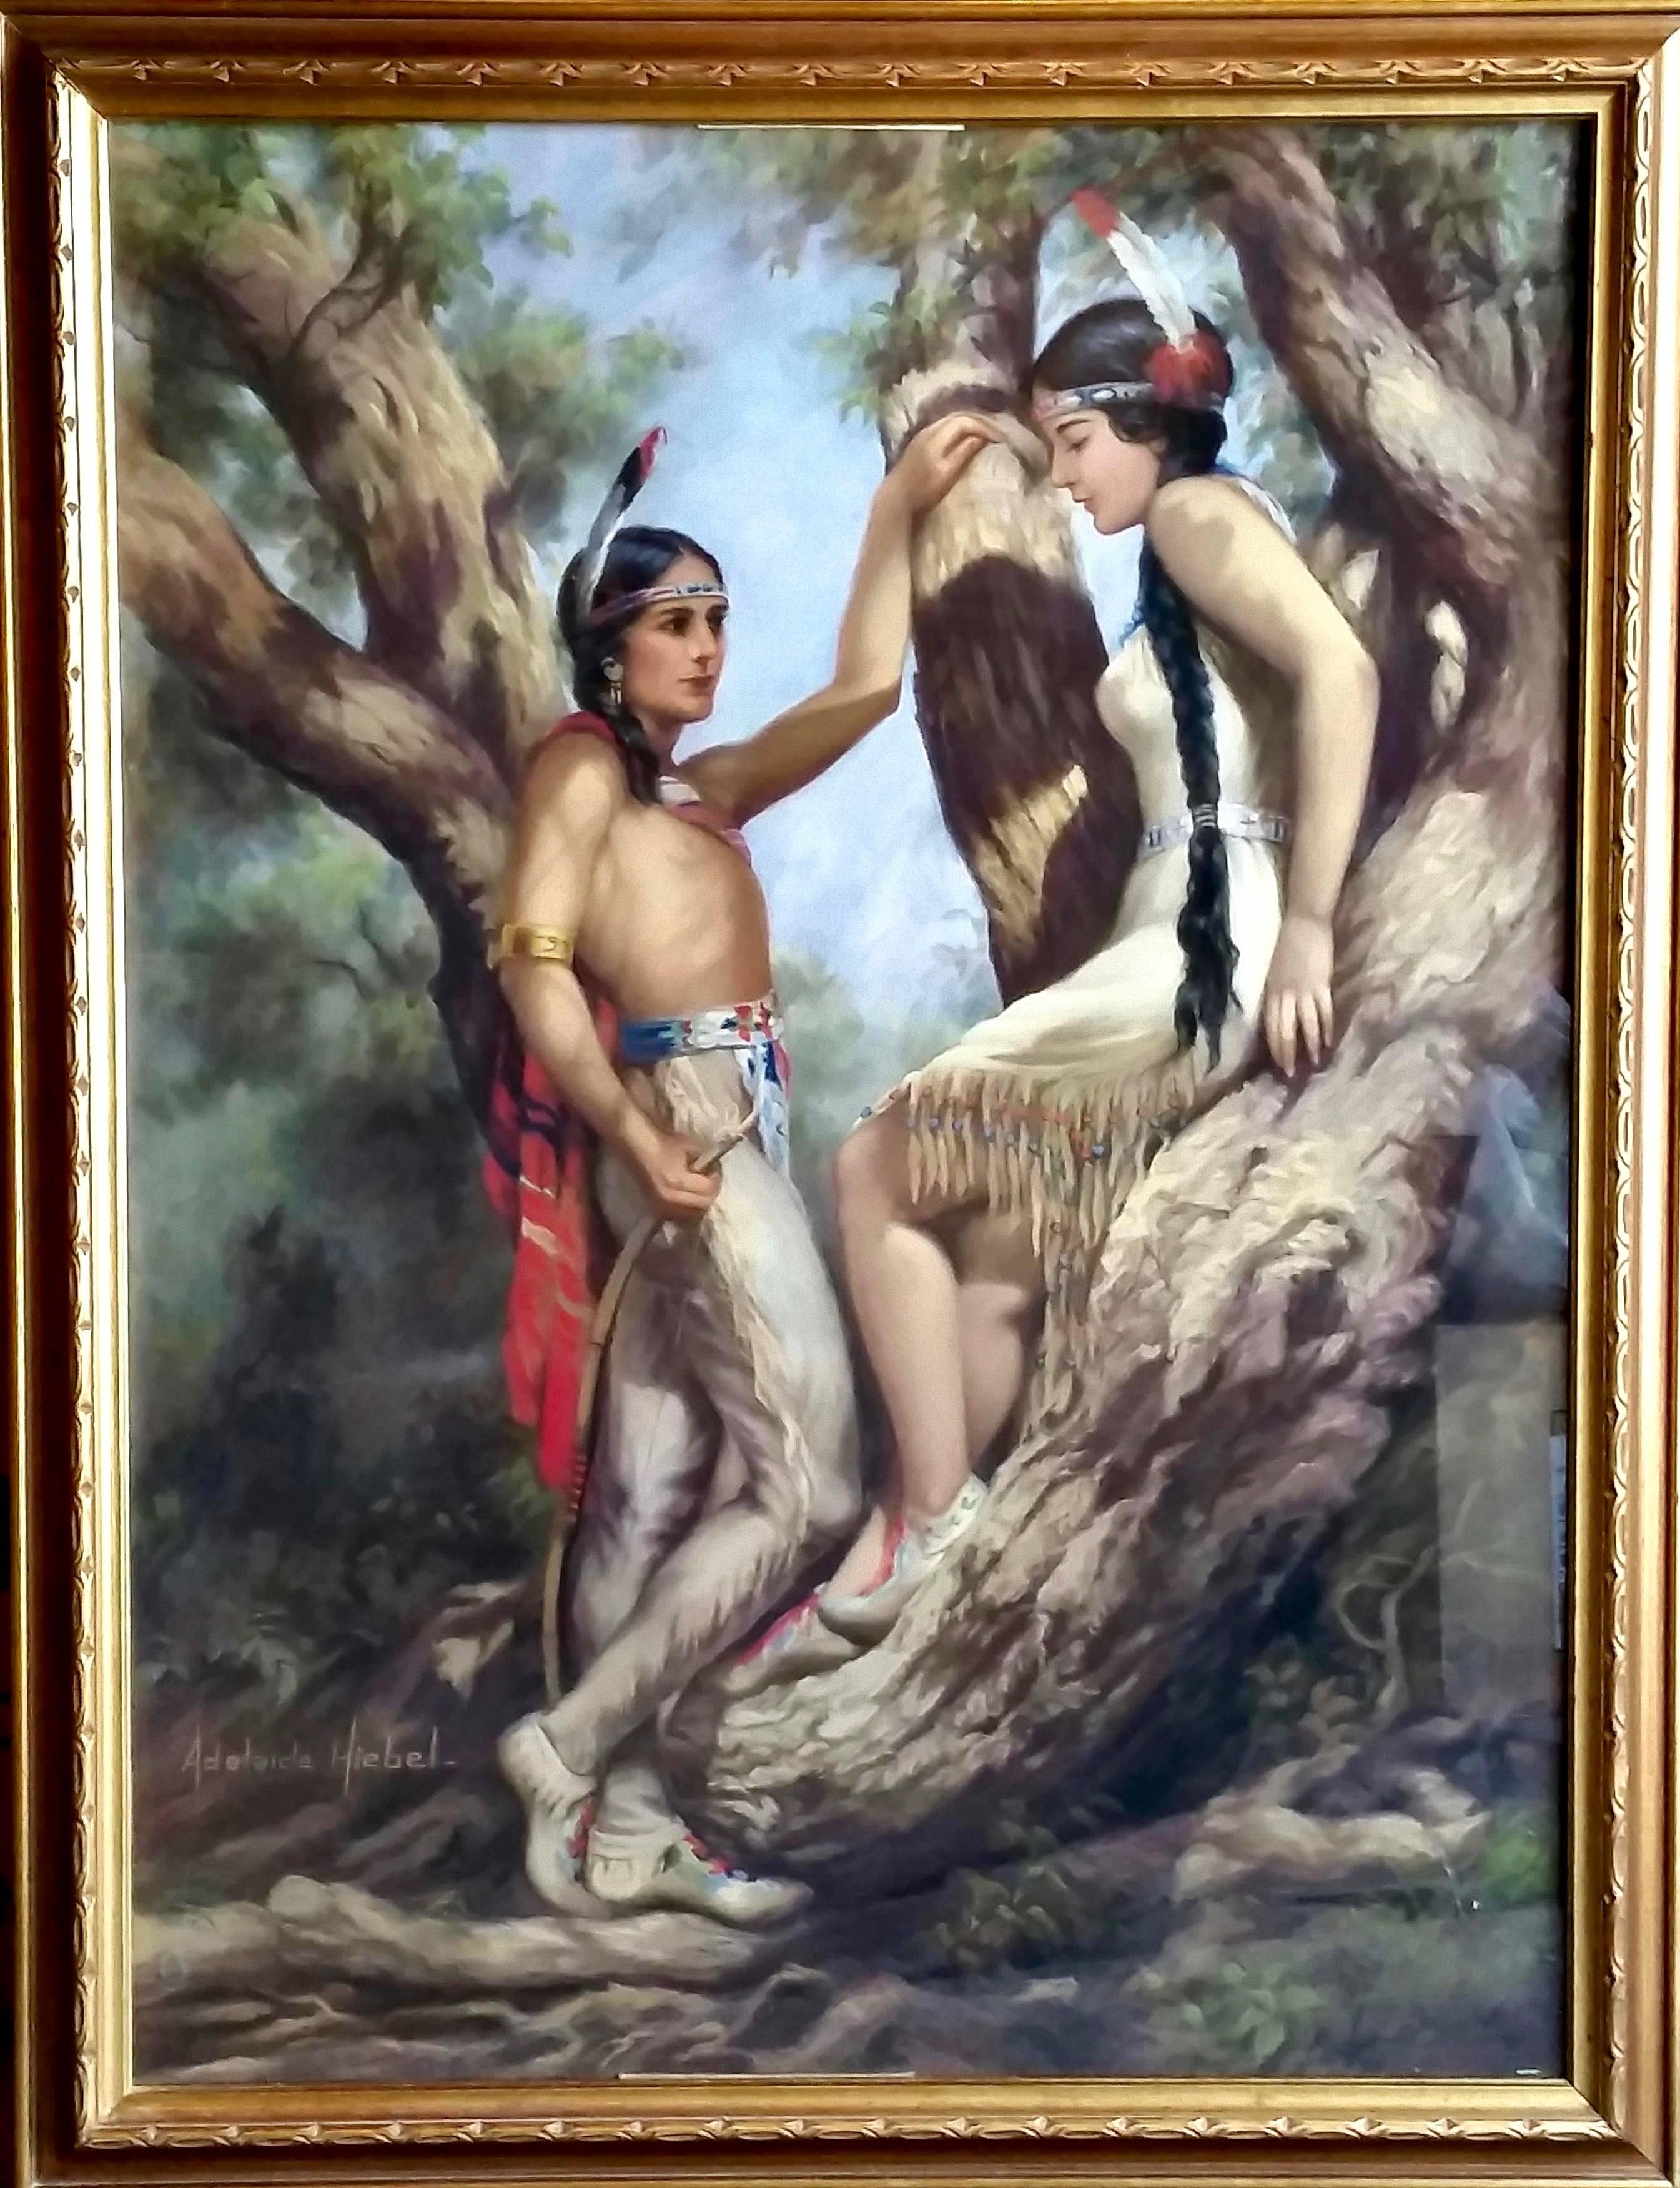 Indian Love Call - Painting by Adelaide Hiebel